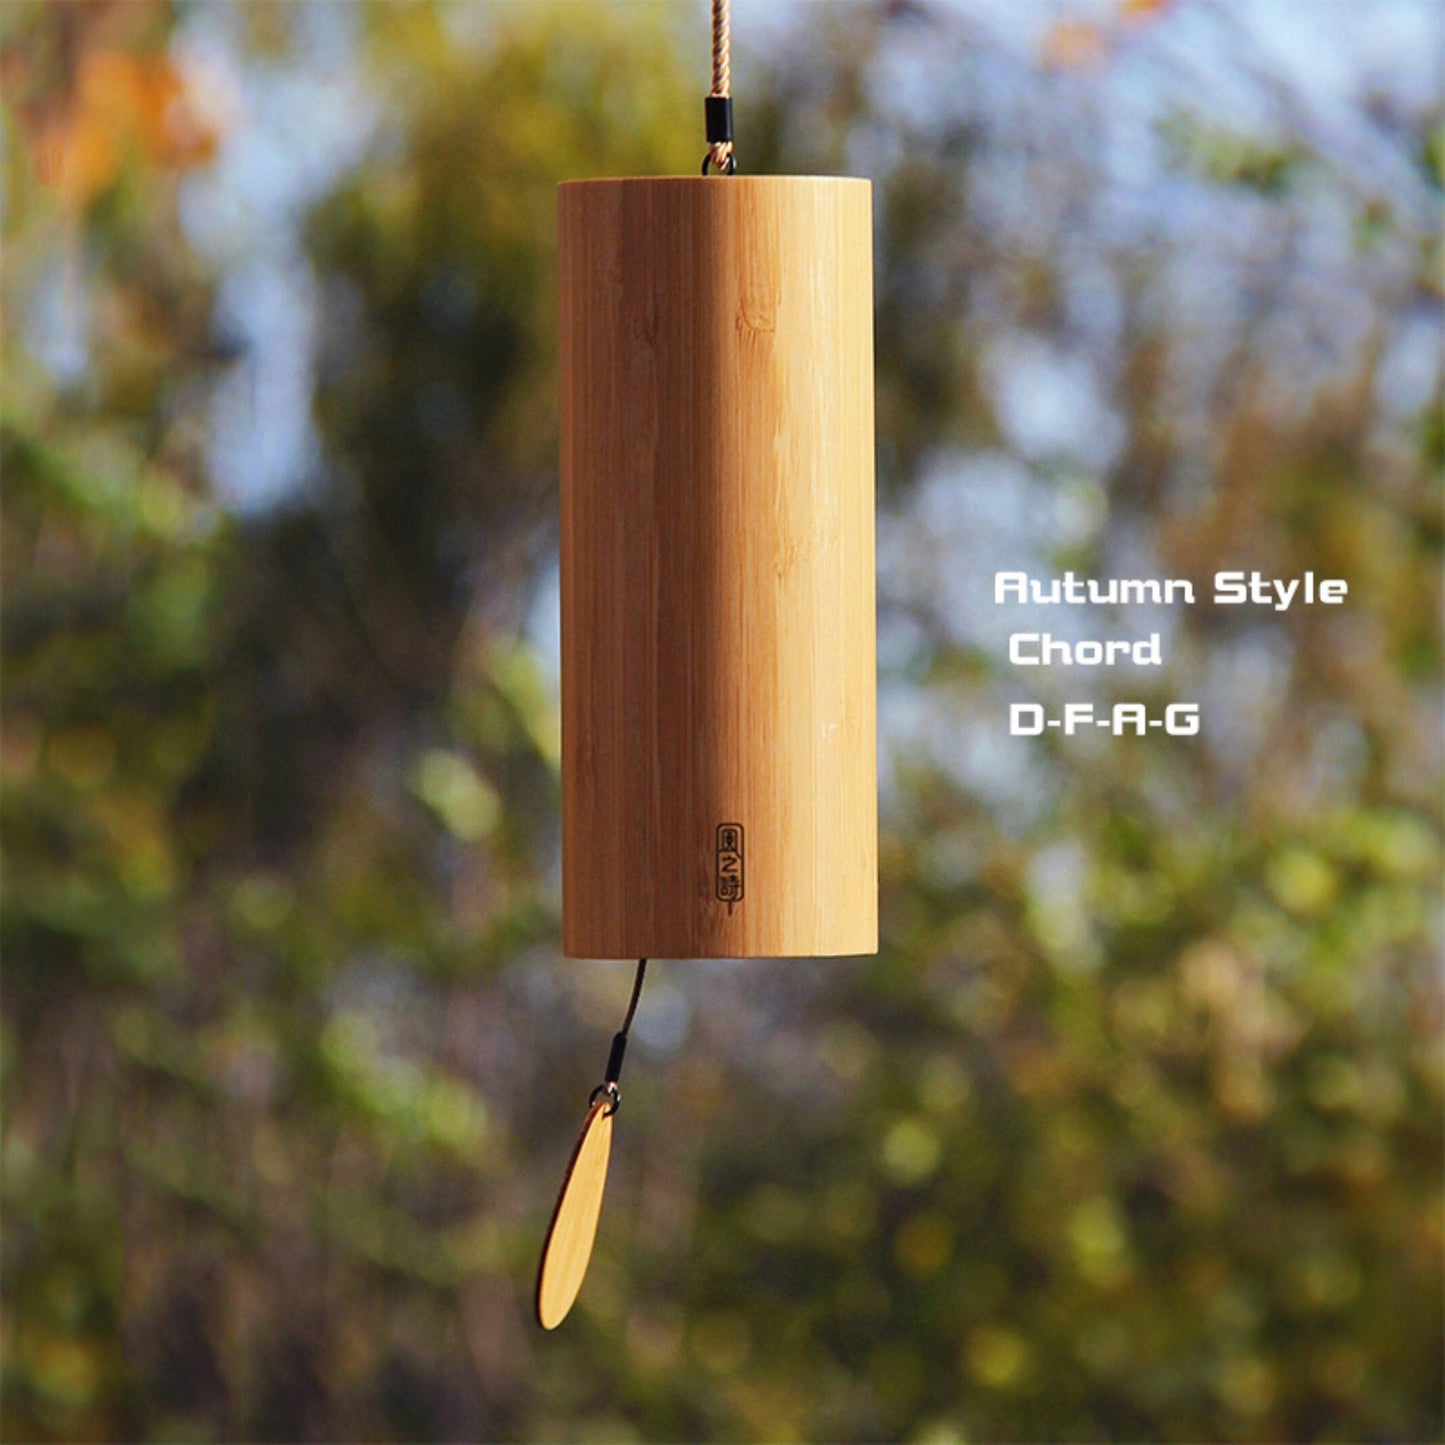 Bamboo Wind Chime 4 Different Melodies | Wind Chimes for Outdoors, Japanese Wind Chime, Zen Garden, Bamboo Wind Chimes, Garden, Patio - -